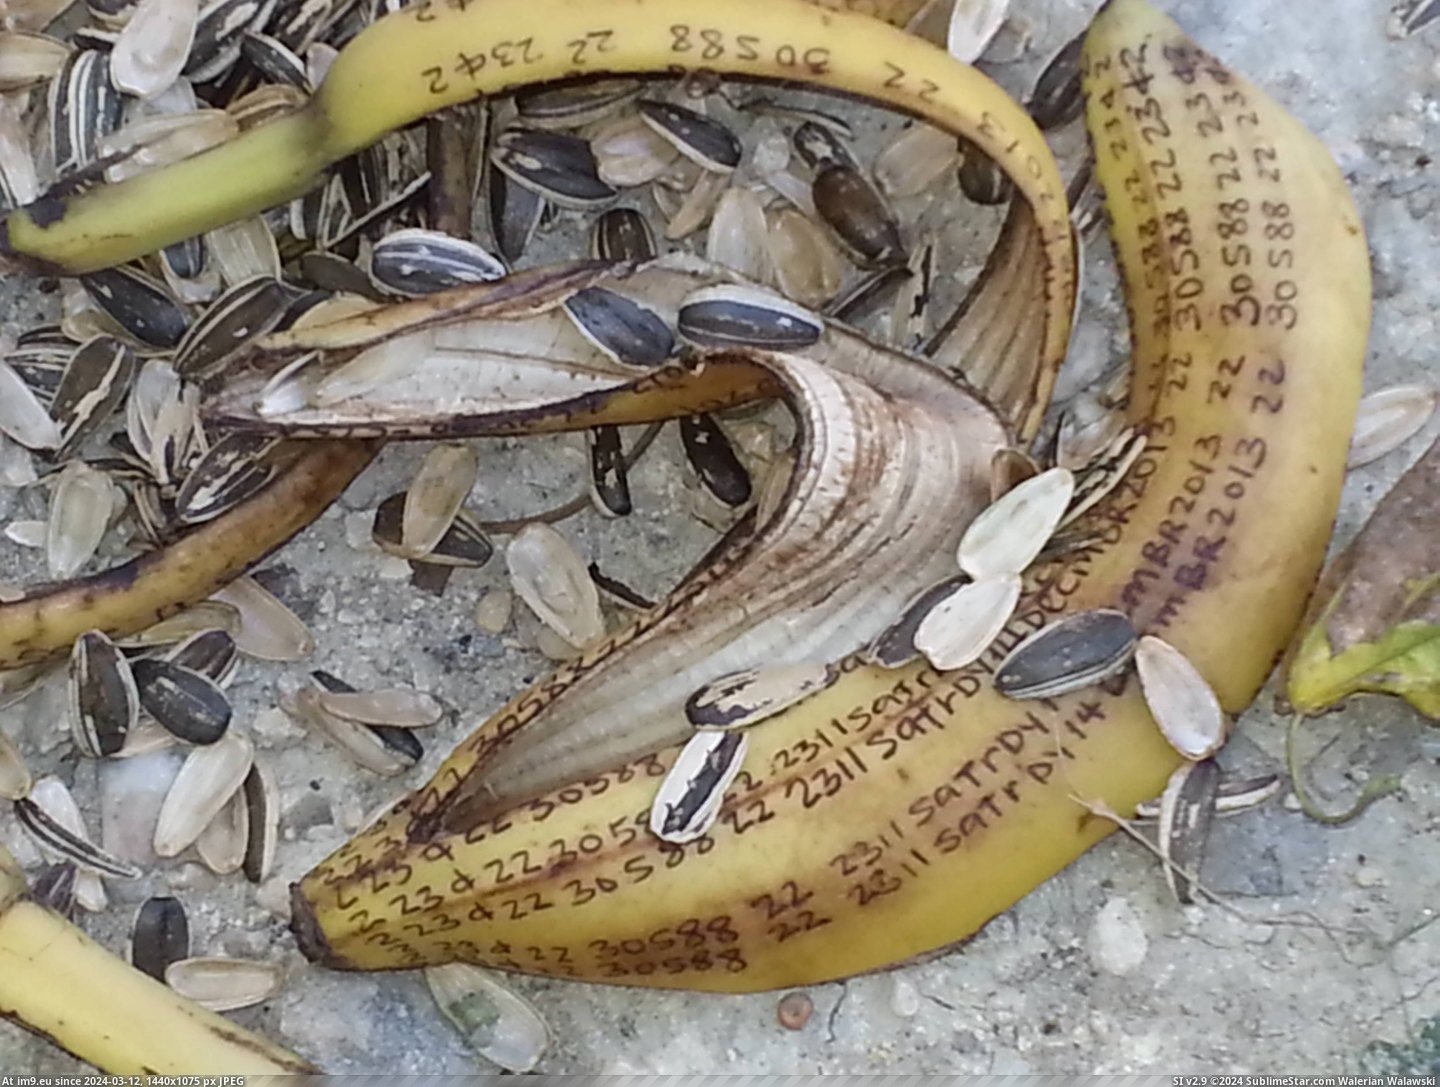 #Wtf #Job #Parking #Peel #Lot #Banana [Wtf] Found a banana peel in the parking lot at my job.....I think its trying to tell me something. ... Pic. (Bild von album My r/WTF favs))